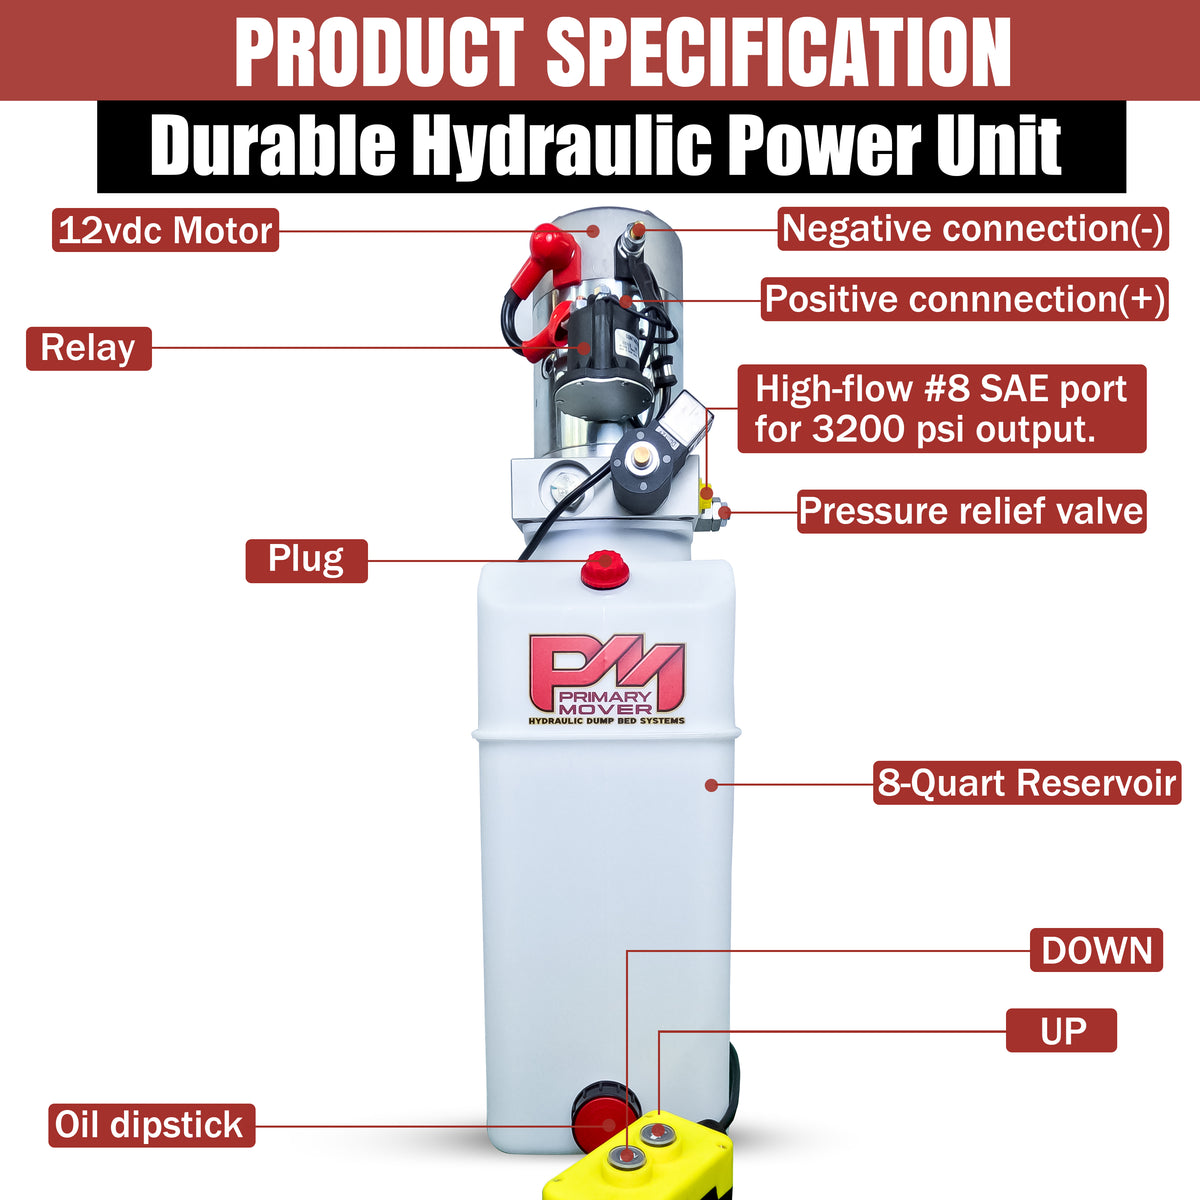 A white cylinder with red and yellow buttons, a yellow object with a red circle, and a red sign with white text, showcasing the Primary Mover 12V Single-Acting Hydraulic Pump - Poly Reservoir for efficient hydraulic dump bed systems.